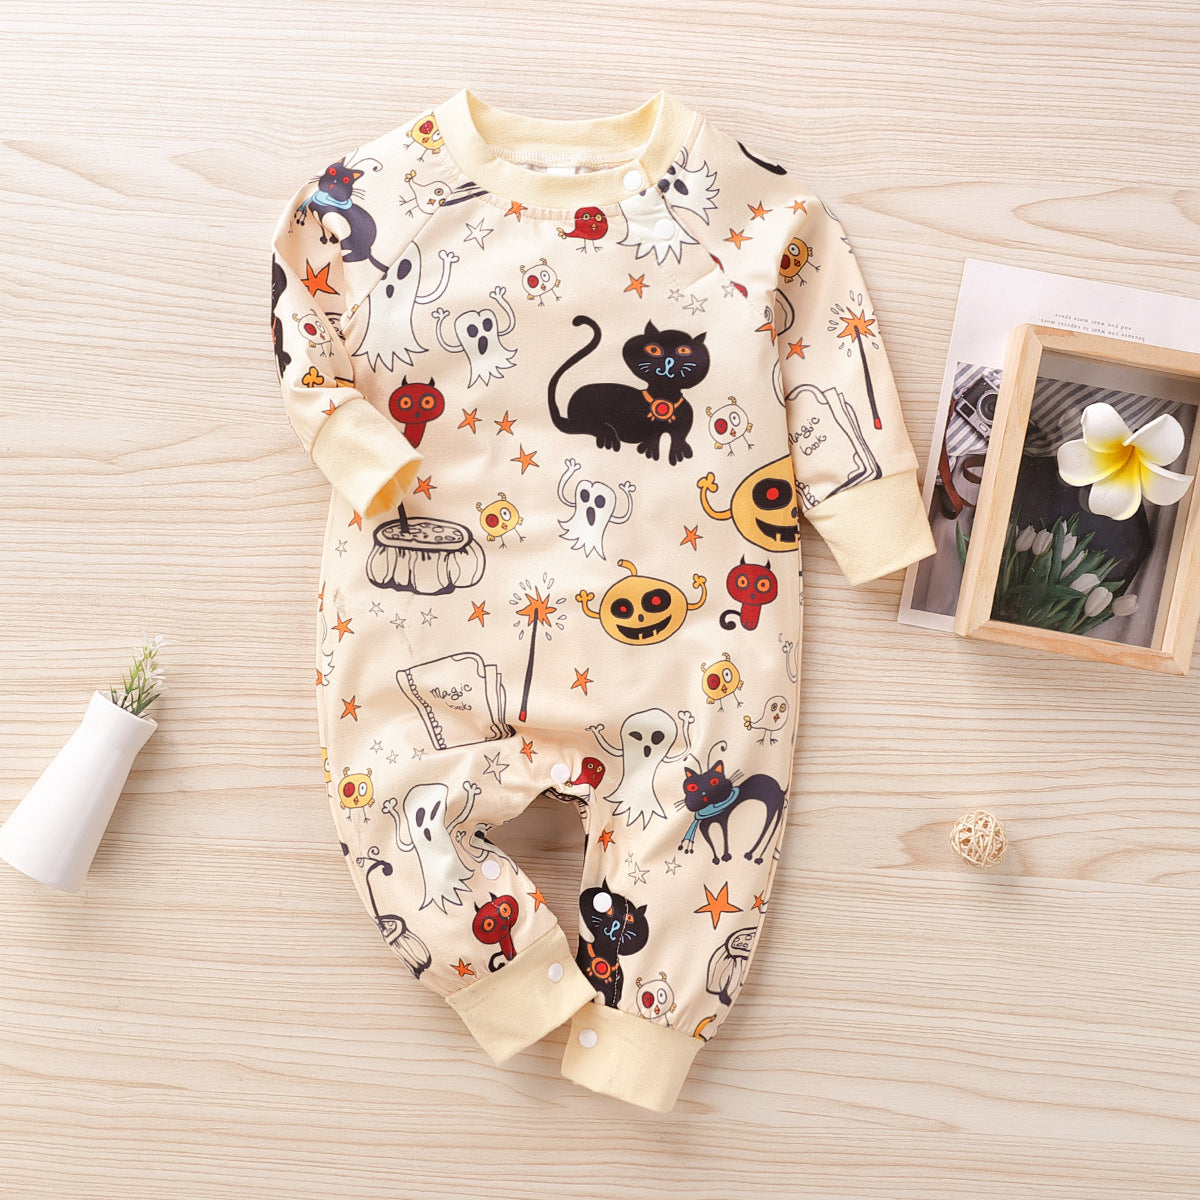 Spooky and Adorable: Dress Your Little One in Our Halloween Print Baby Jumpsuit